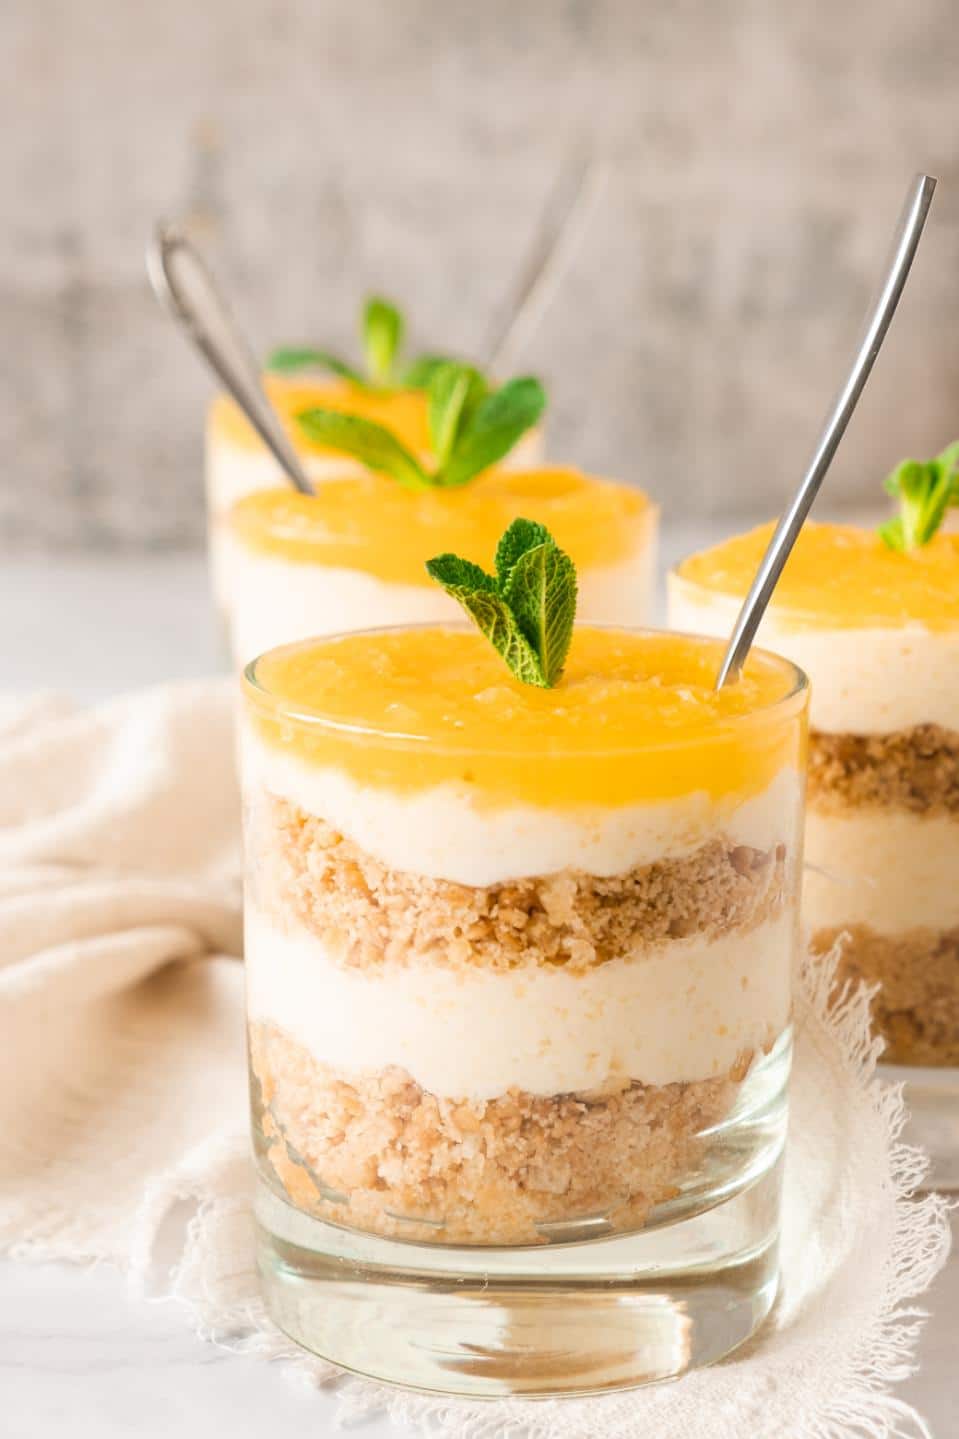 Pineapple cheesecakes served in individual glasses